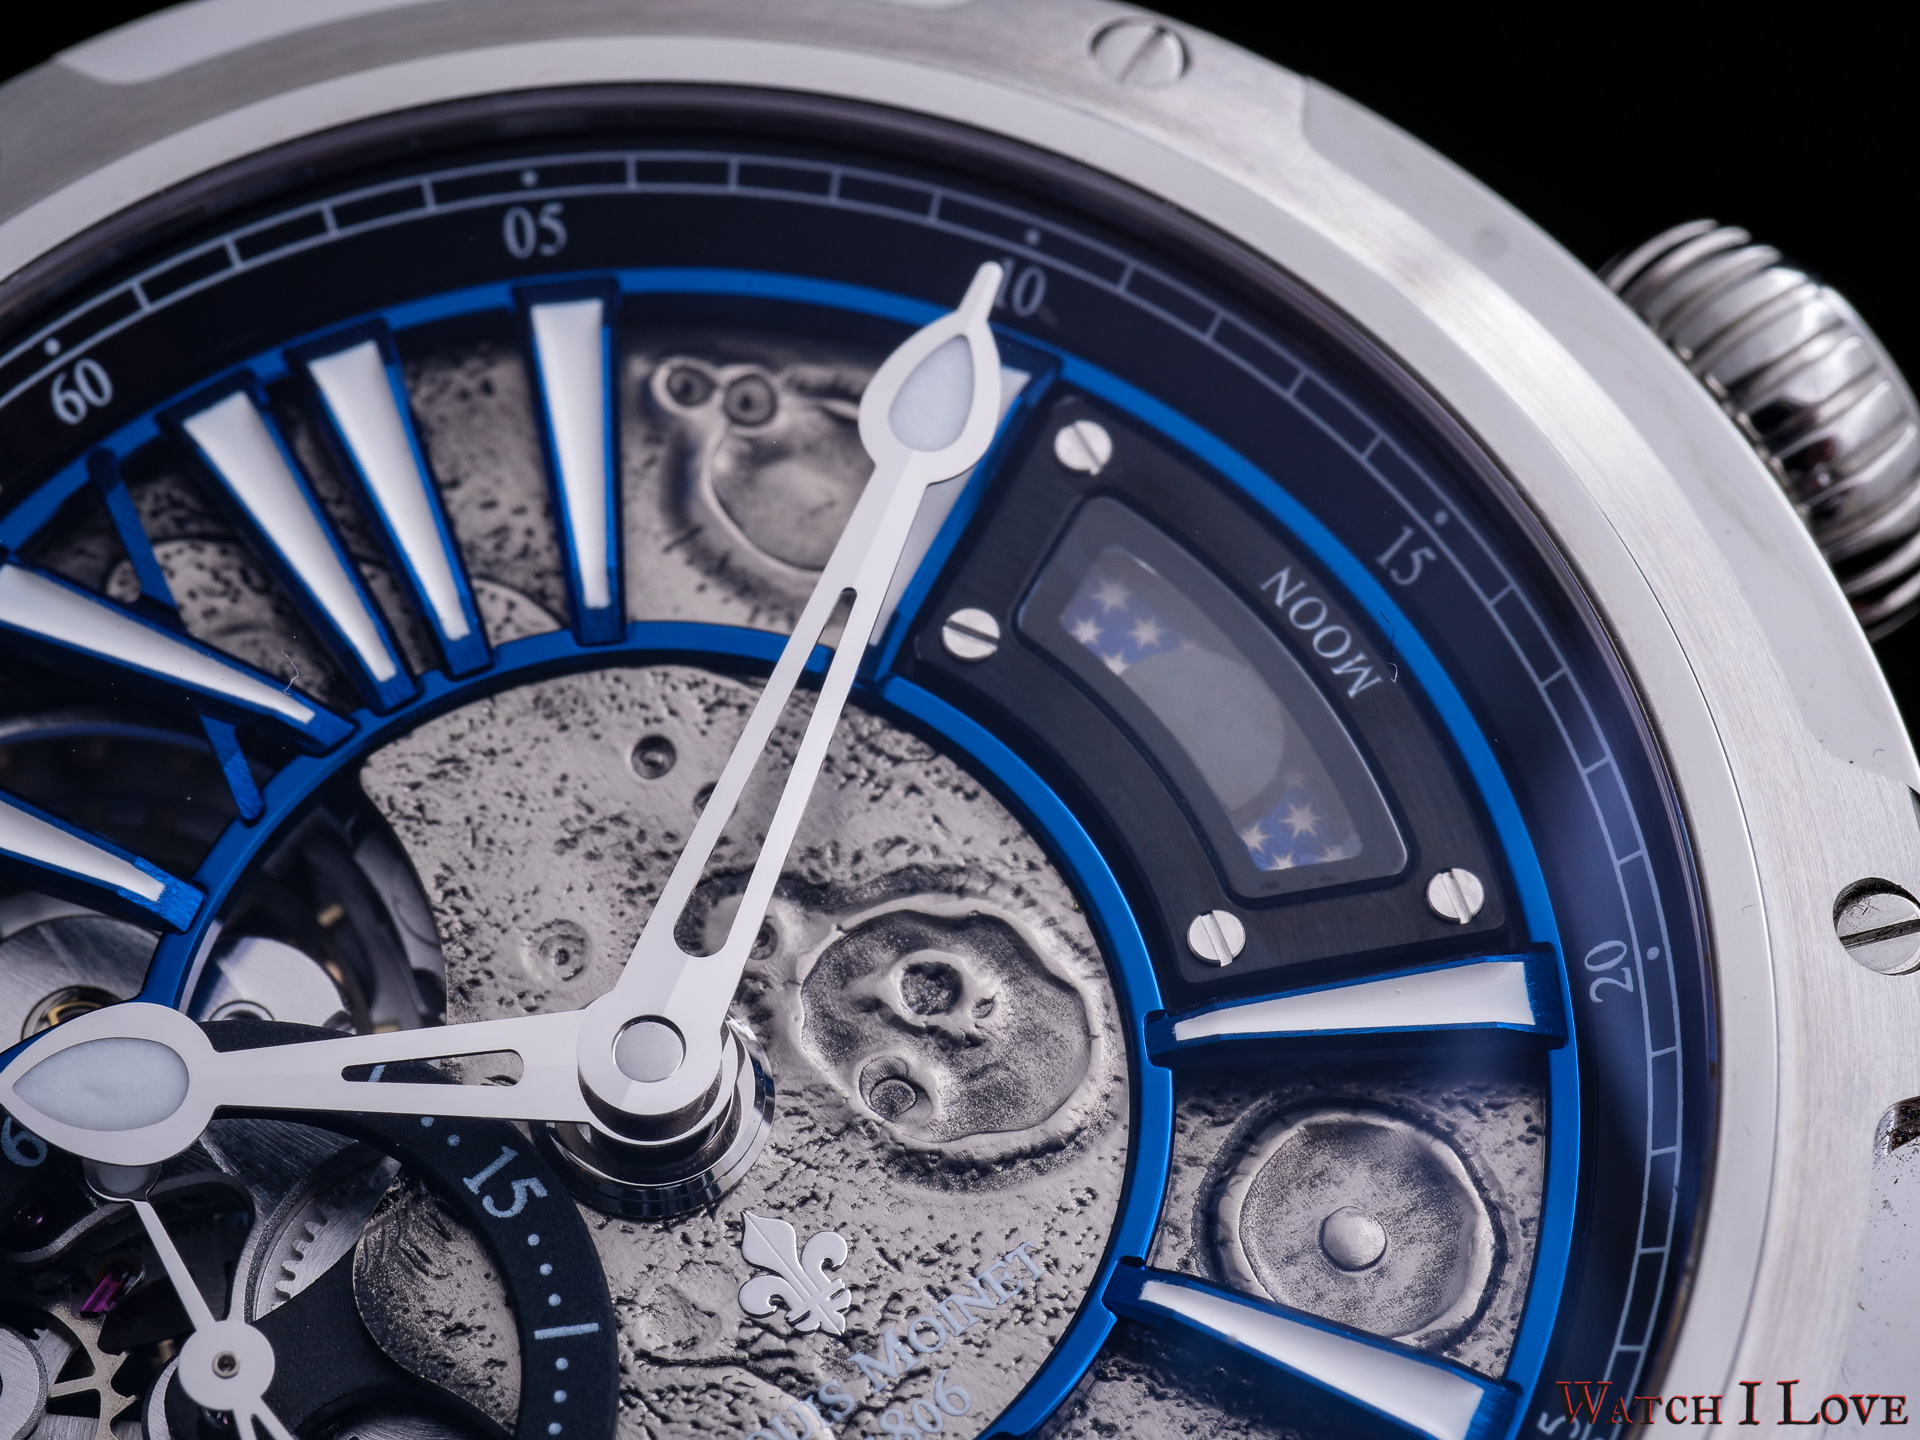 Blue Moon - 12-piece limited edition by Louis Moinet